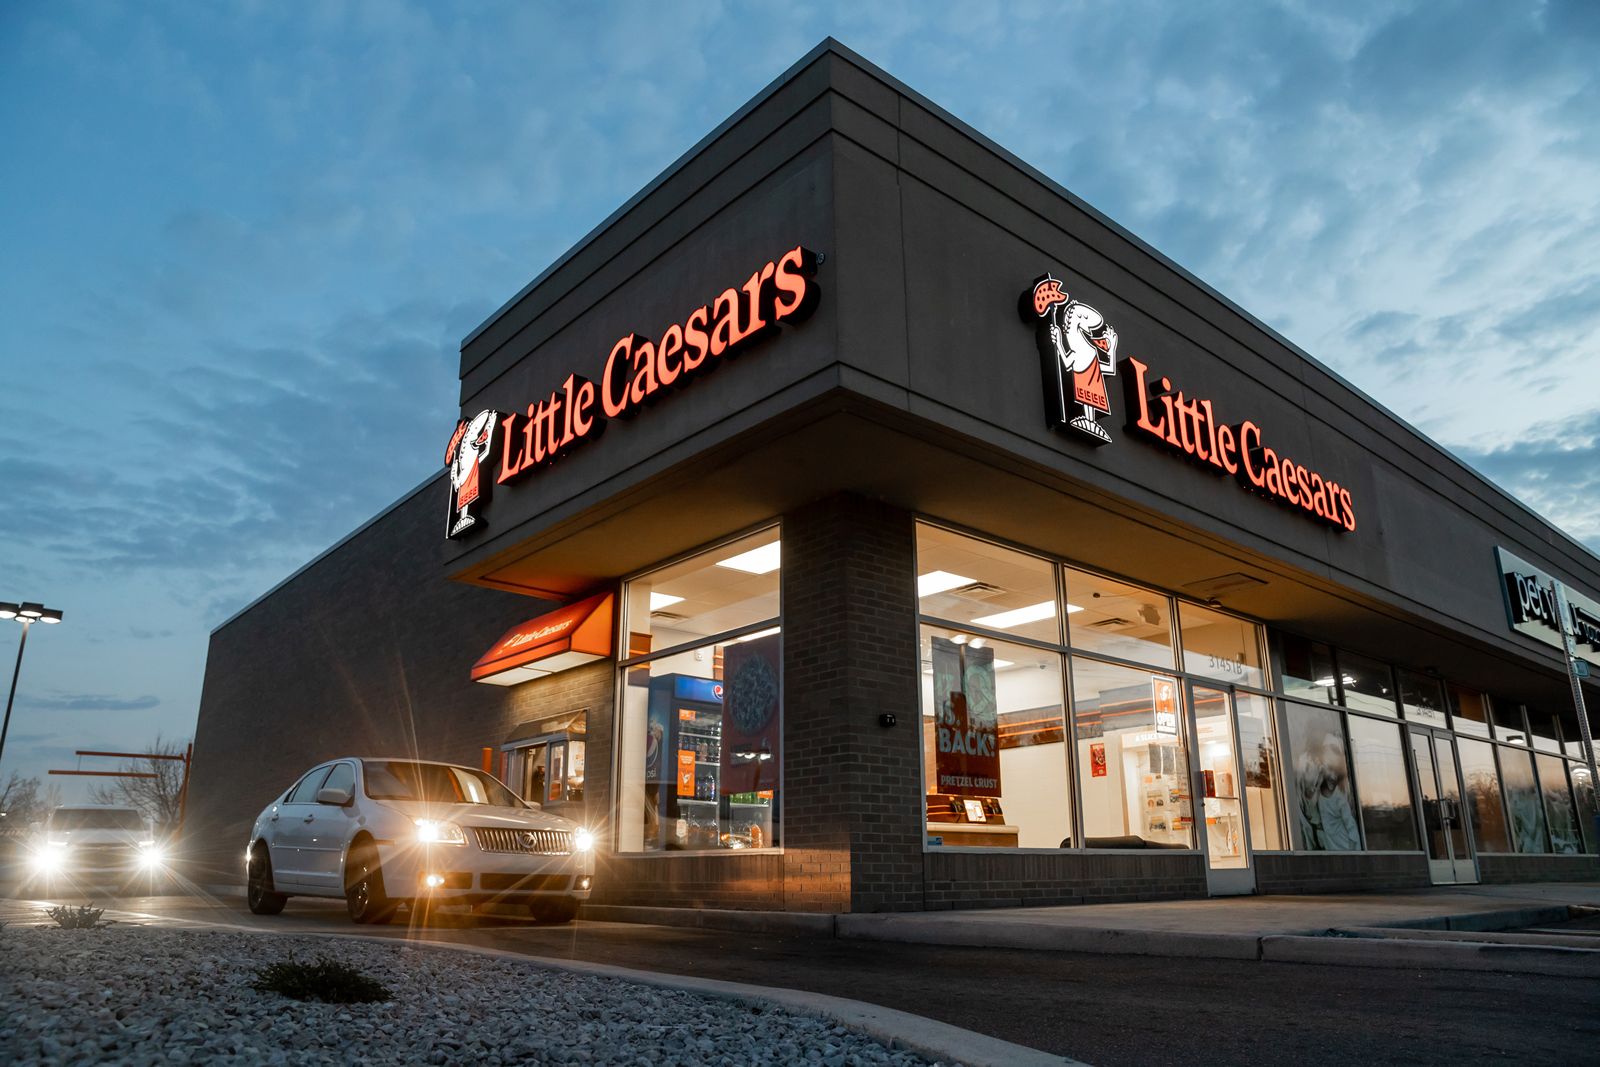 Little Caesars Pursues Charlotte Franchise Expansion, Targeting 25 New Units by 2024